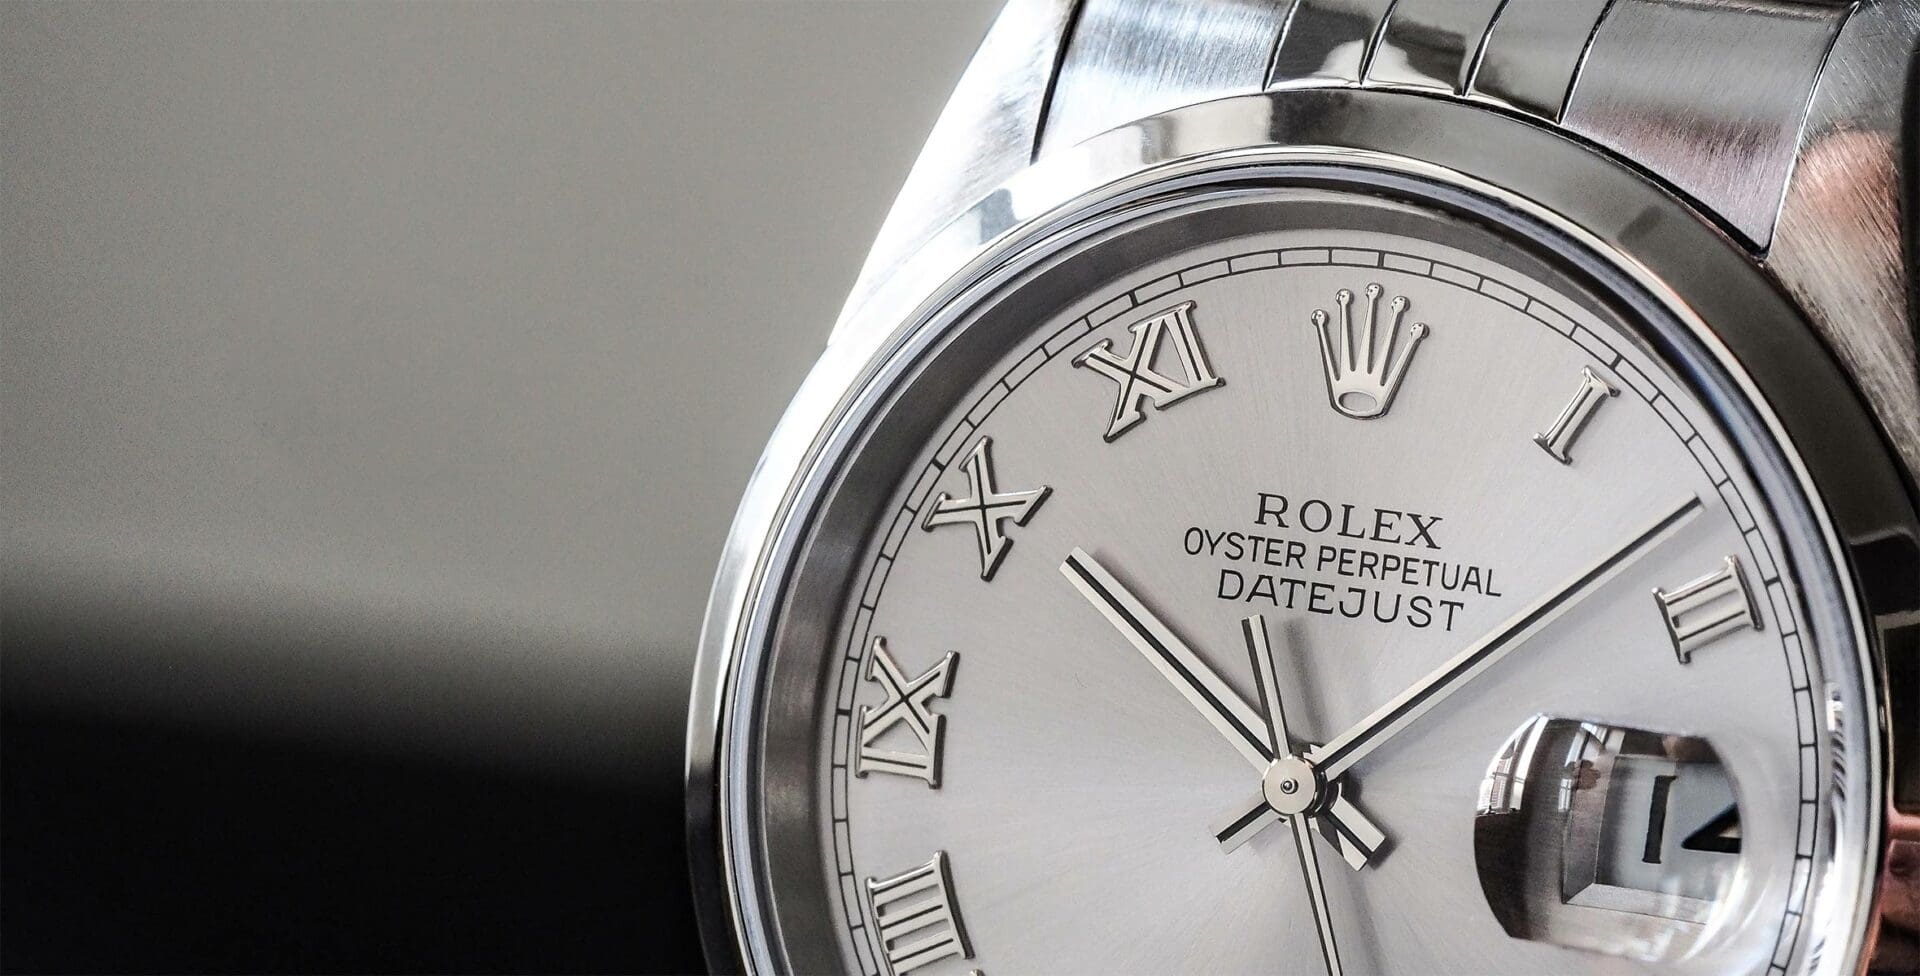 24 Wearing the Rolex Datejust – An In-depth